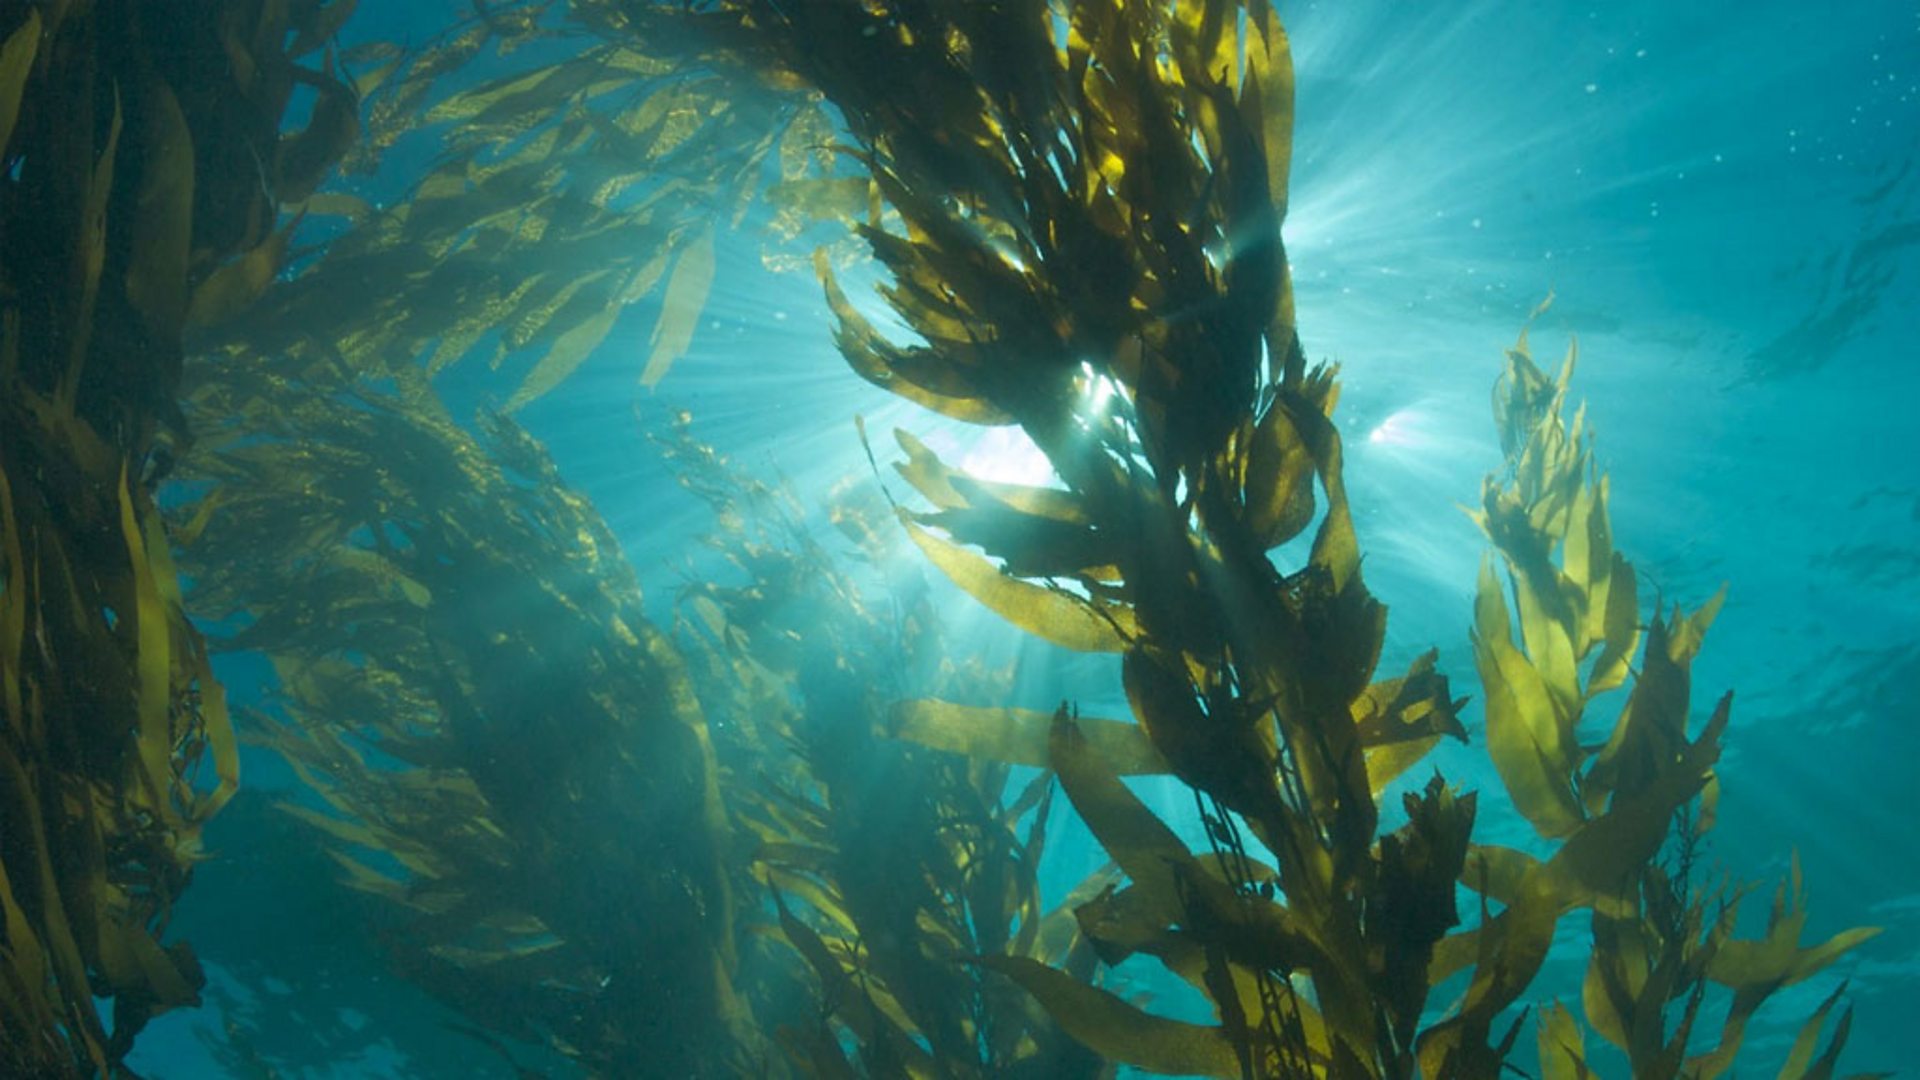 Kelp Forests